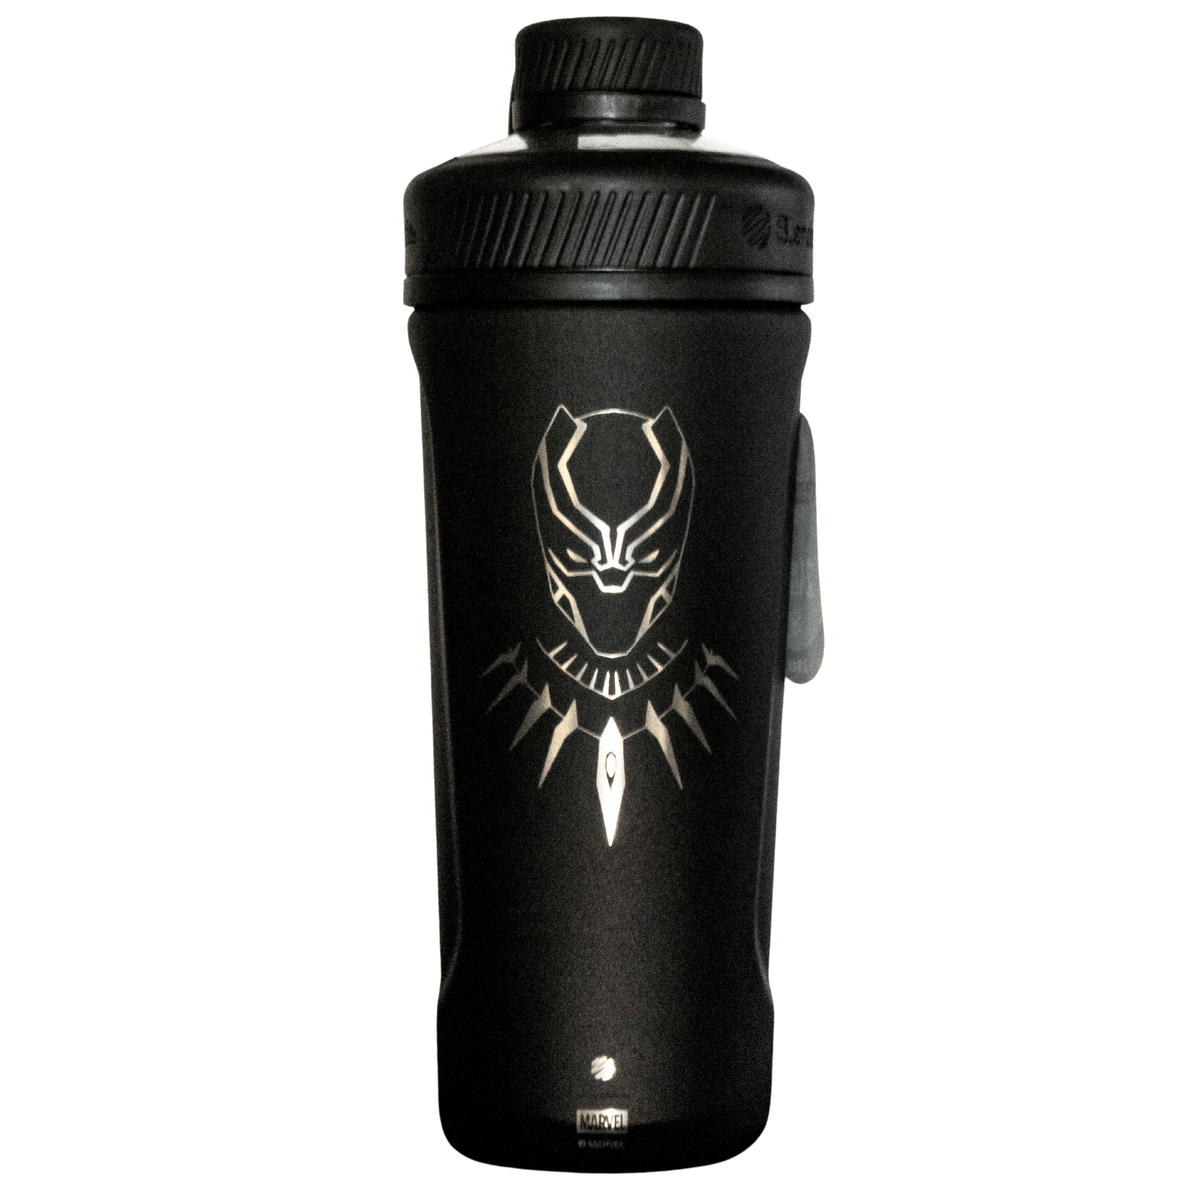 Blender Bottle Accessories Amazing Blender Bottle - Marvel (Captain America and Black Panther) - Officially Licensed Marvel Stainless Steel Shaker Cups for movement muscle mood and motivation